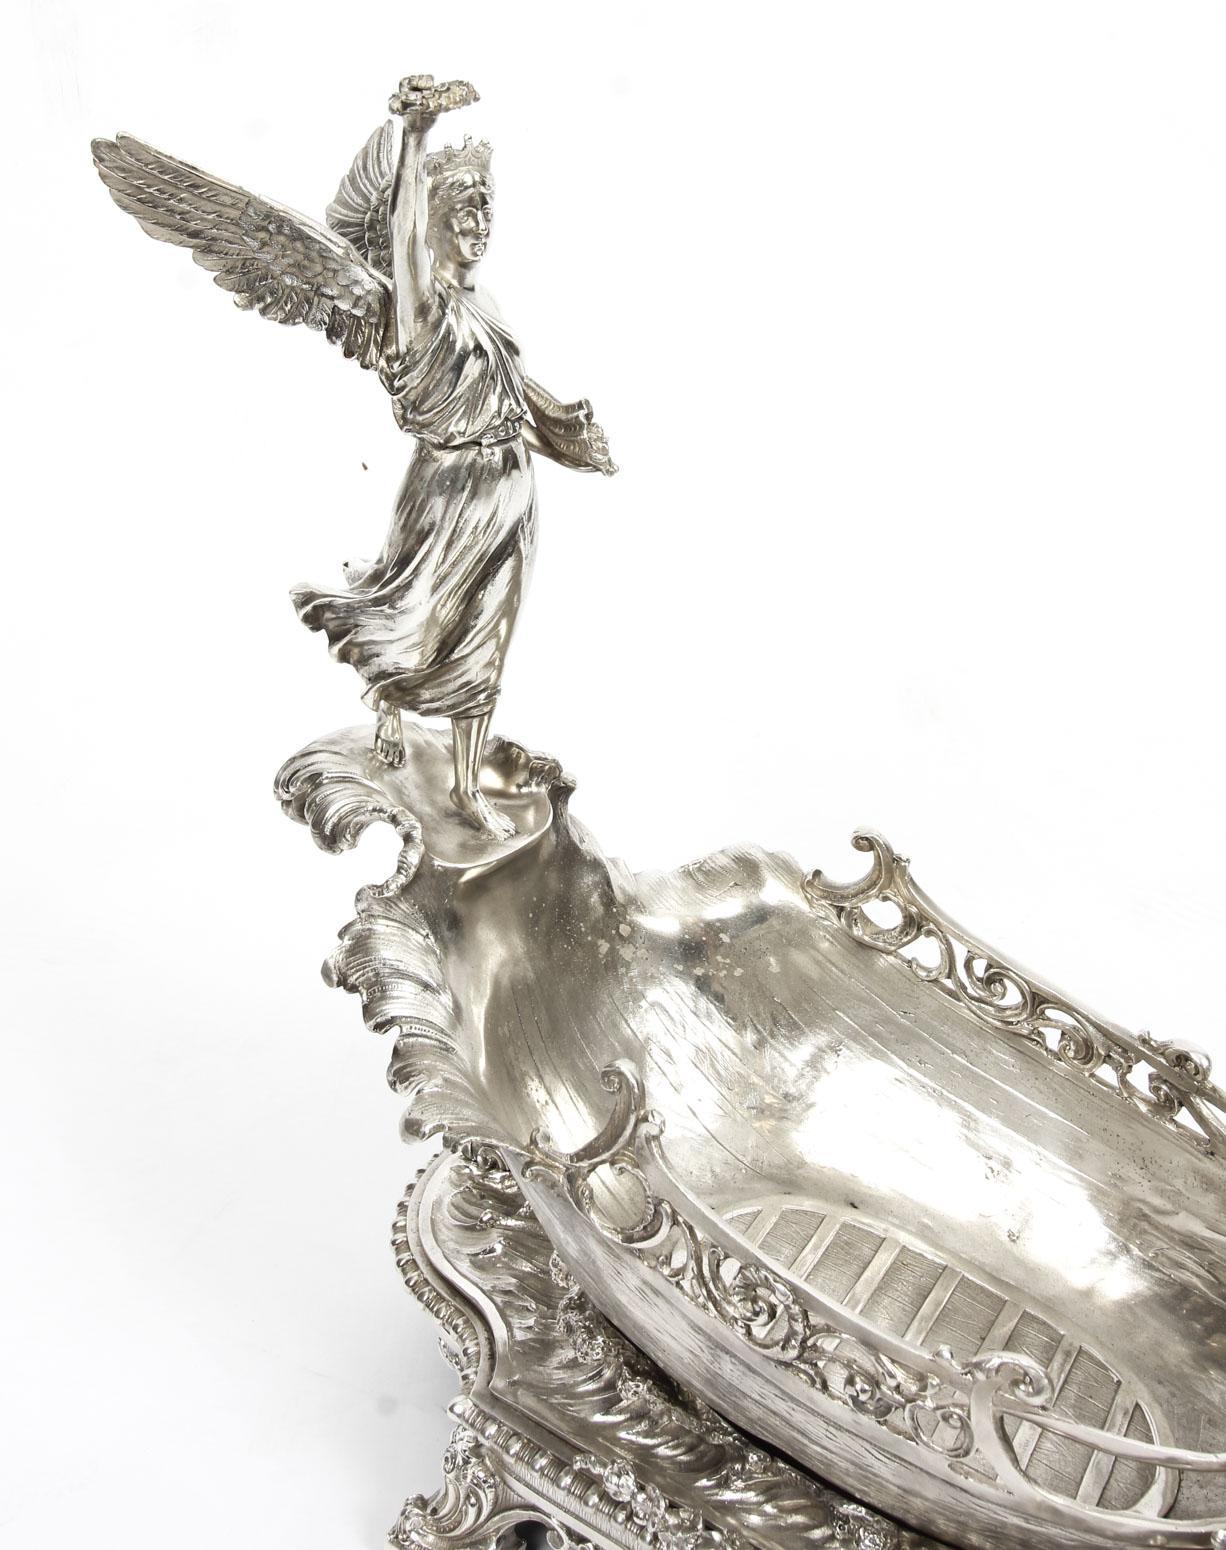 A stunning vintage silver plated centrepiece in the shape of a boat riding the waves preceded by a swan with the winged Victory of Samothrace, dating from the second half of the 20th century.

This stunning piece is ideal for displaying fruit or